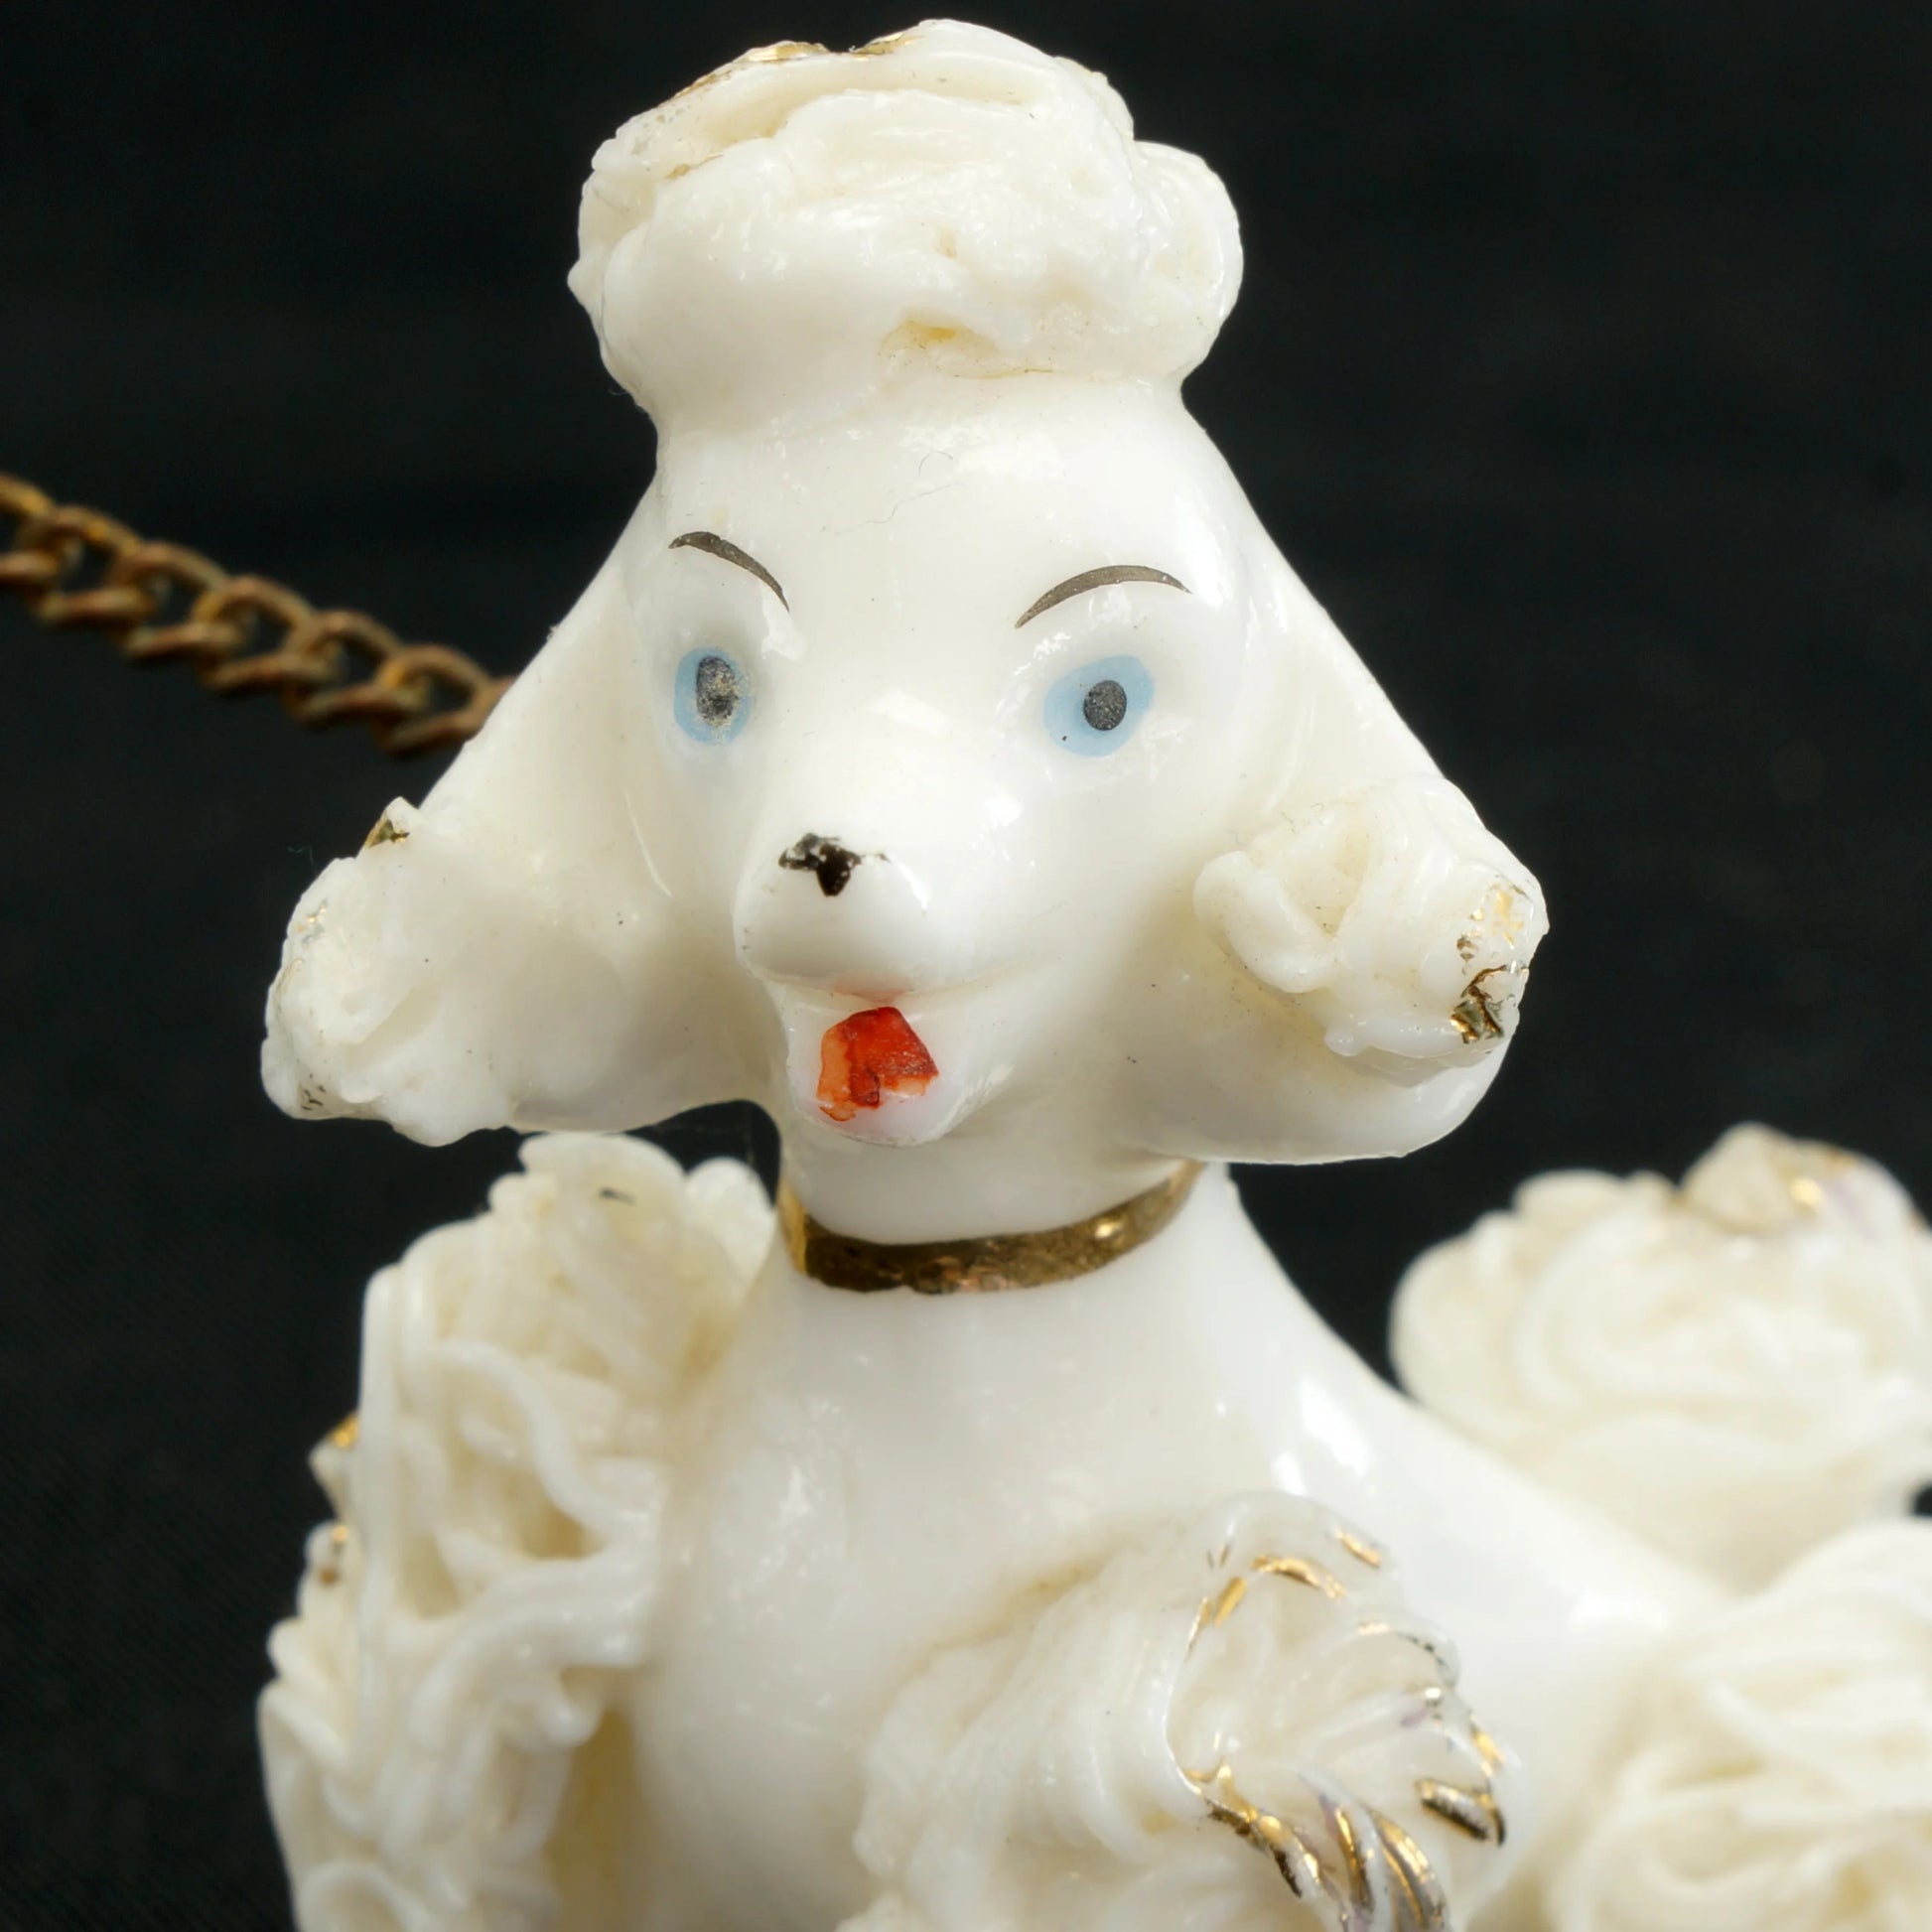 Mid Century Ceramic Spaghetti Poodle and Pup on Chain 1950’s - Bear and Raven Antiques